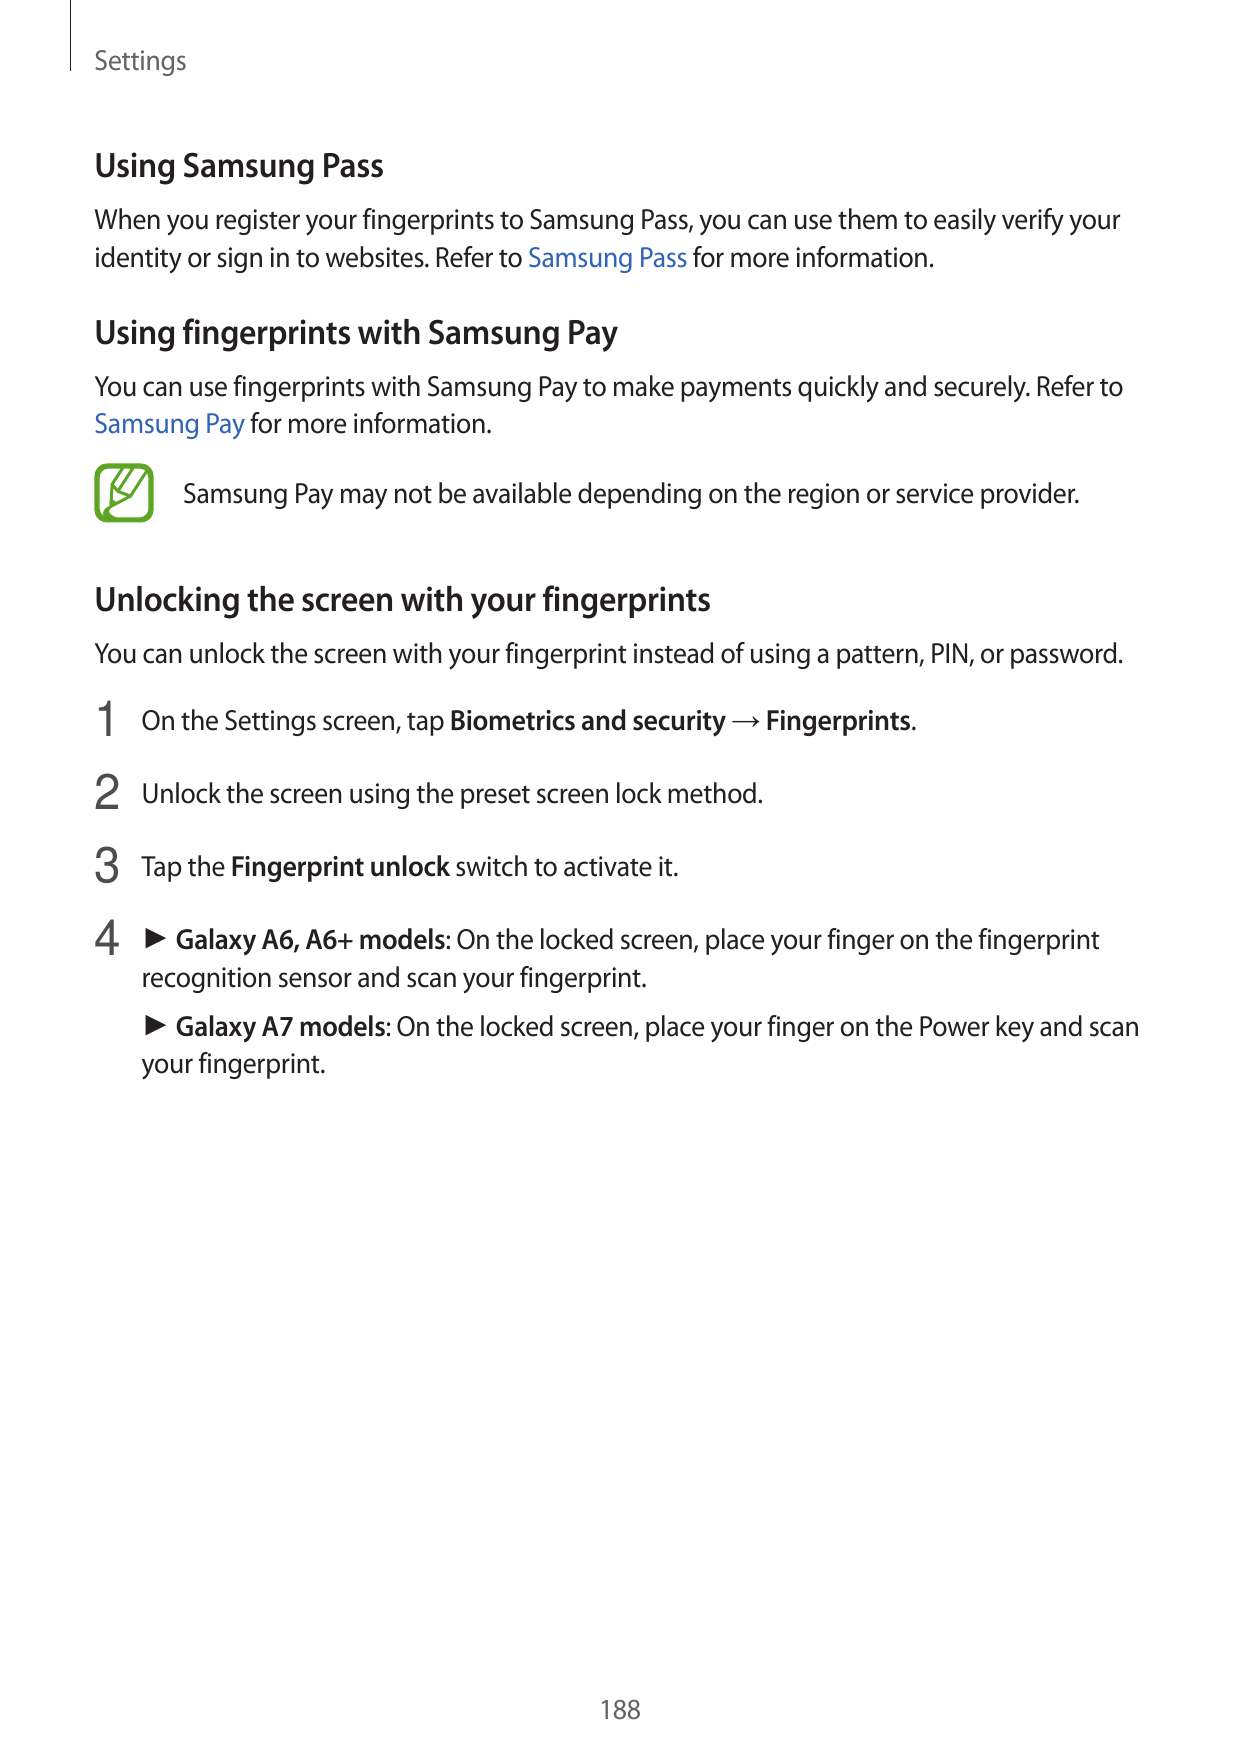 SettingsUsing Samsung PassWhen you register your fingerprints to Samsung Pass, you can use them to easily verify youridentity or